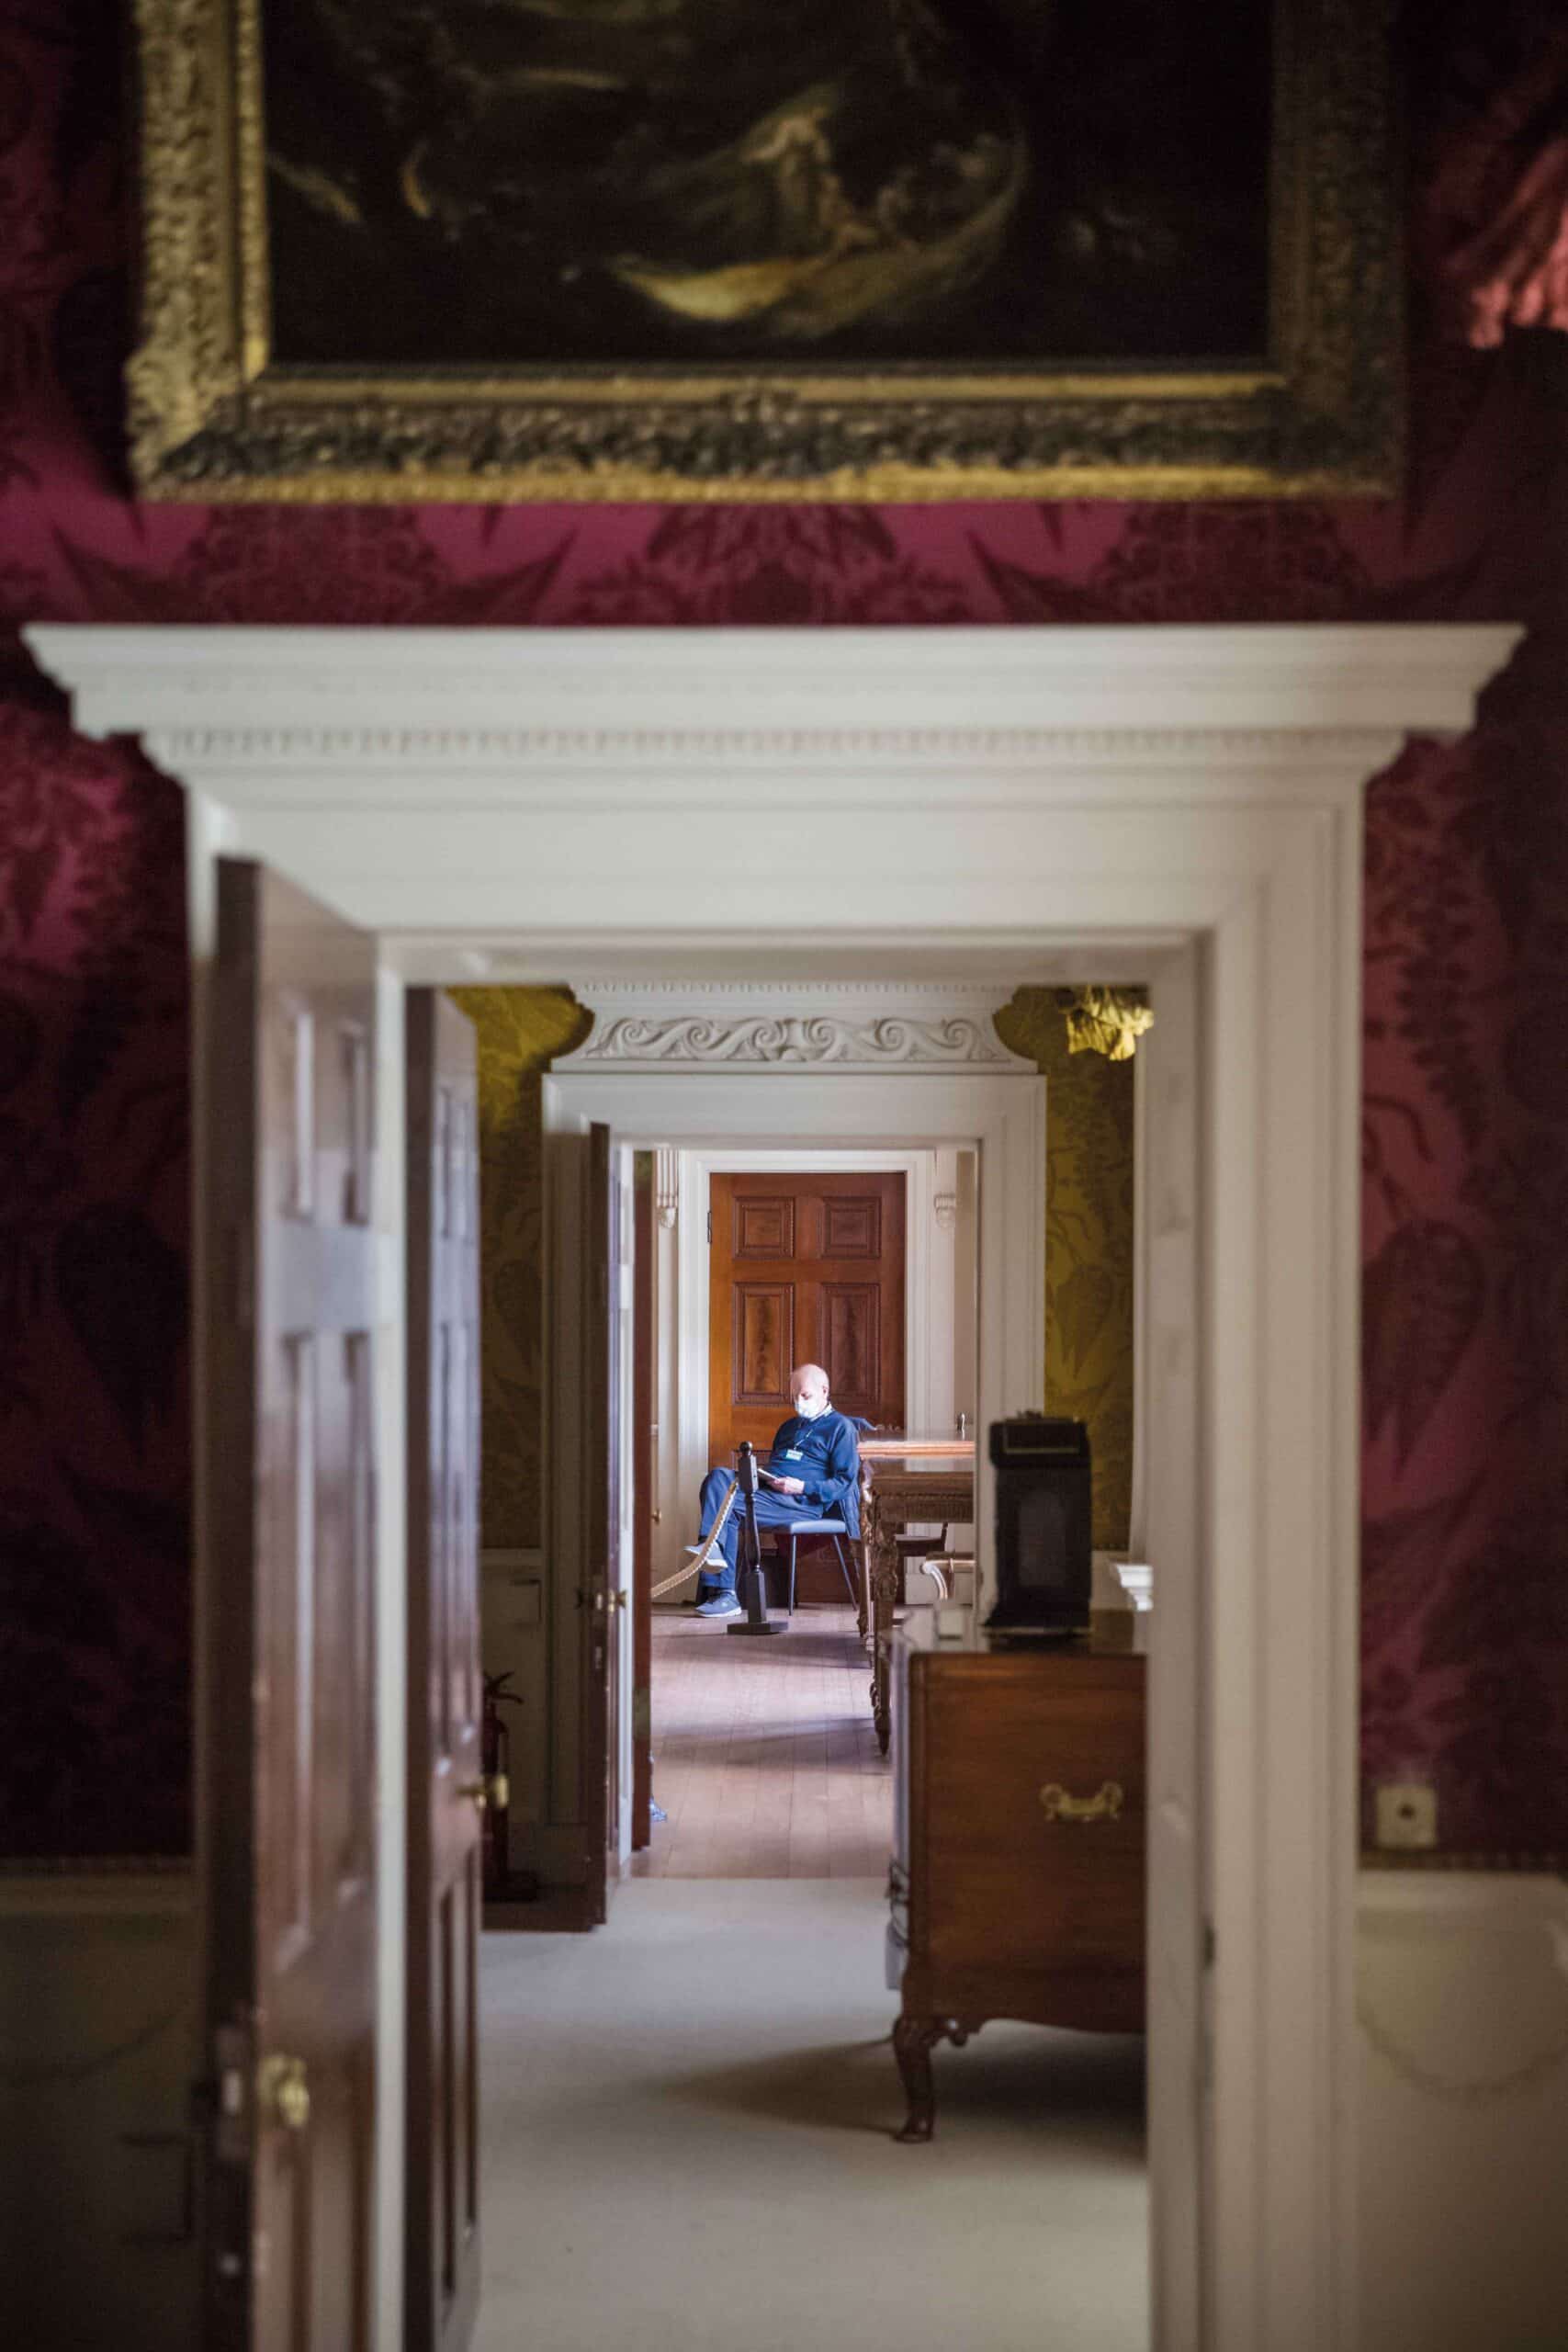 A volunteer seen through an enfilade of rooms at Nostell Priory, one of the properties referenced in the National Trust’s interim report on links between its properties and colonialism